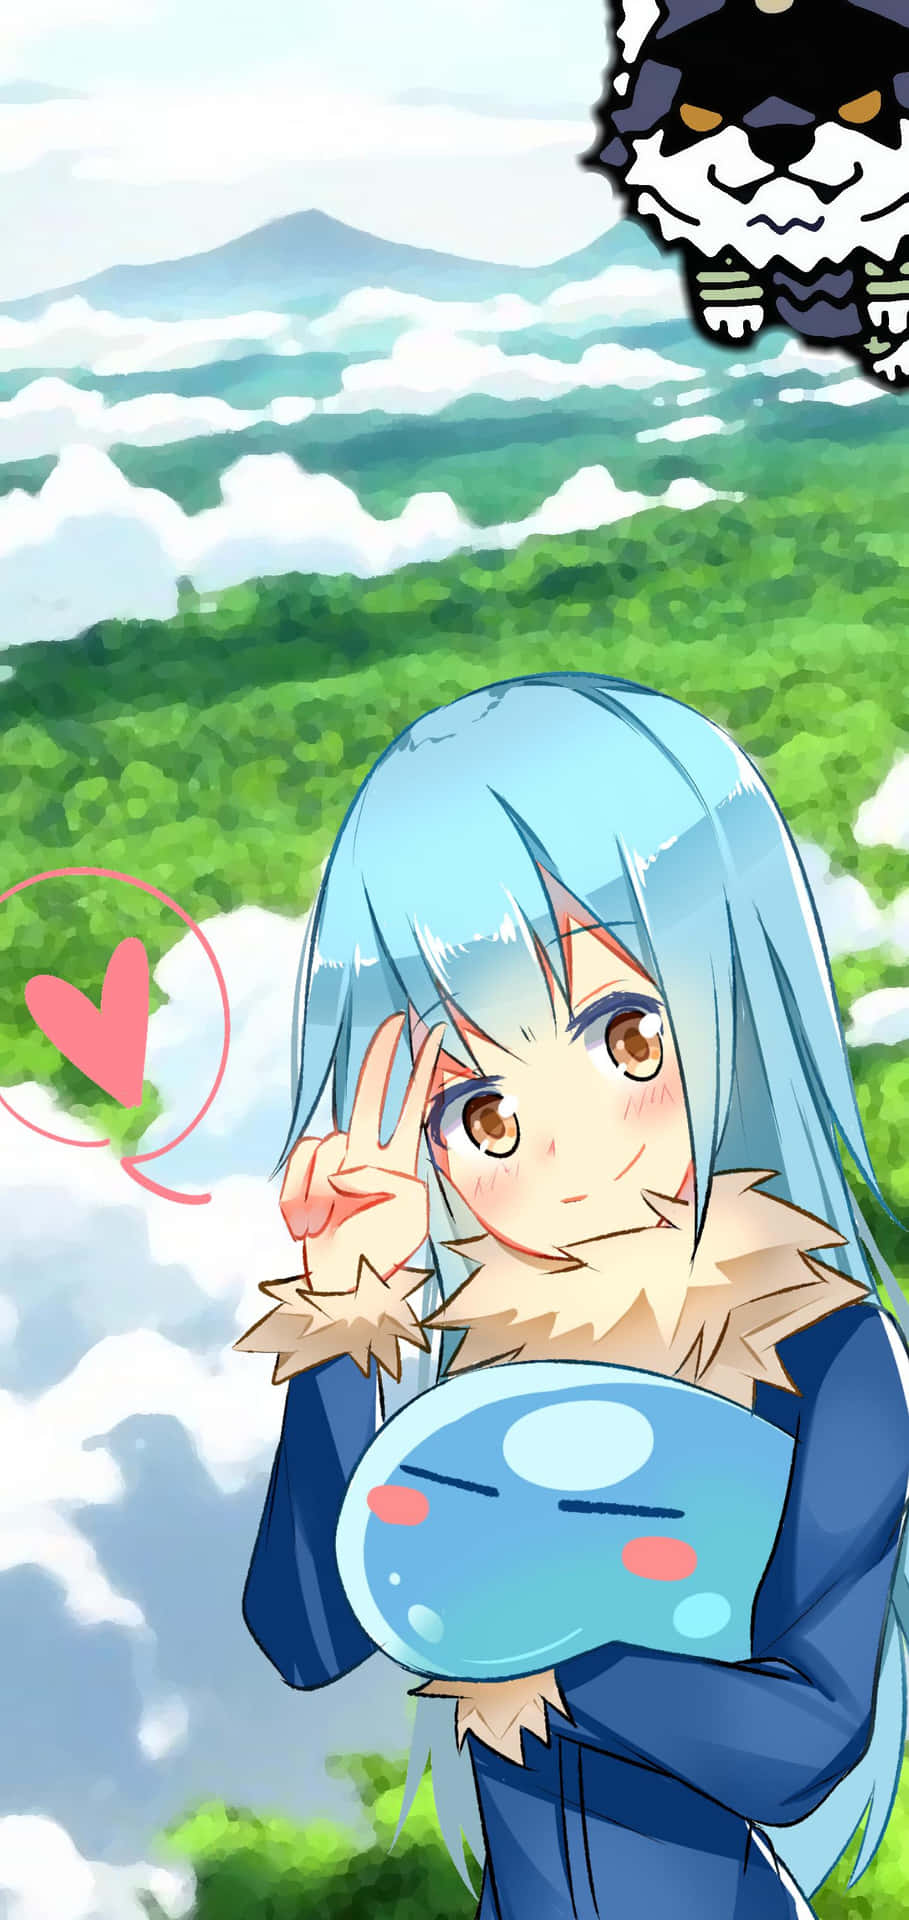 "Rimuru taking on another epic adventure!"